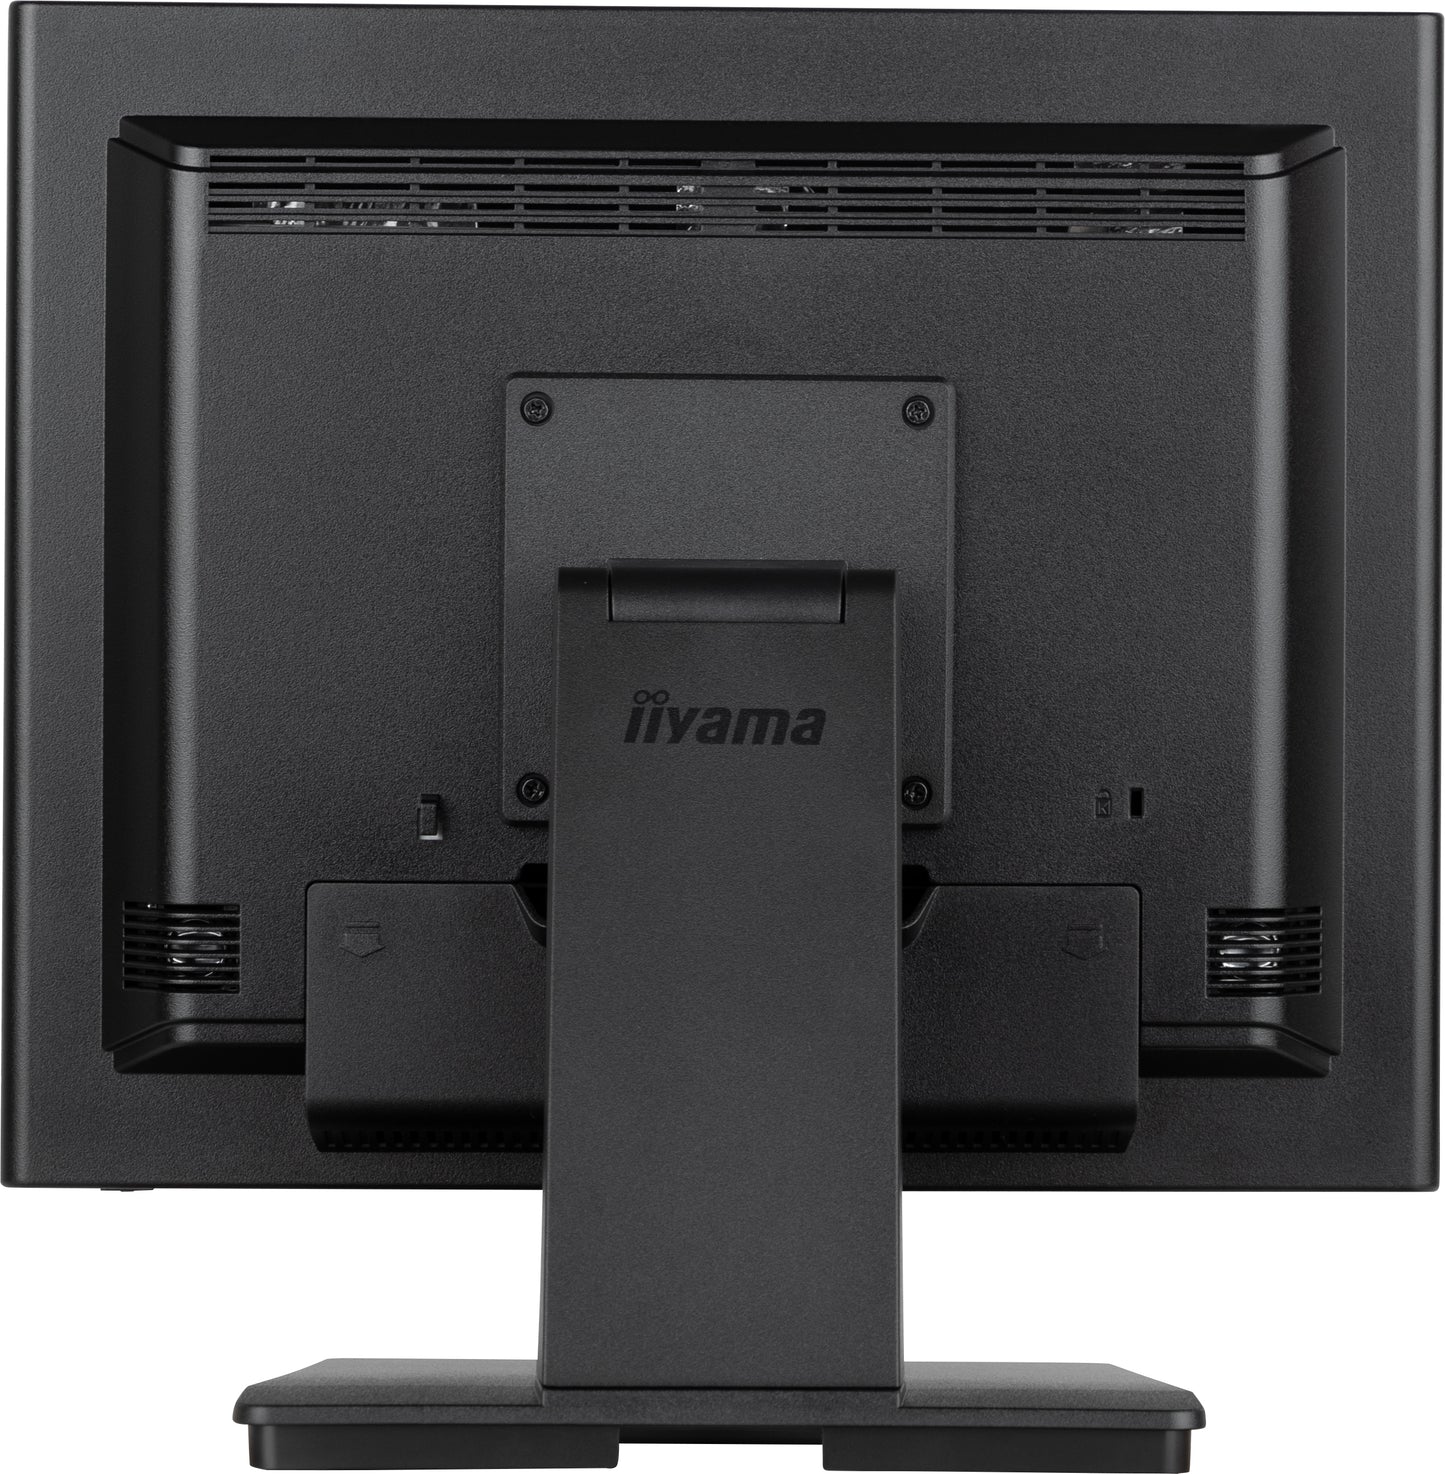 iiyama ProLite T1731SR-B1S 17” Touchscreen with 5-wire Resistive Touch Technology